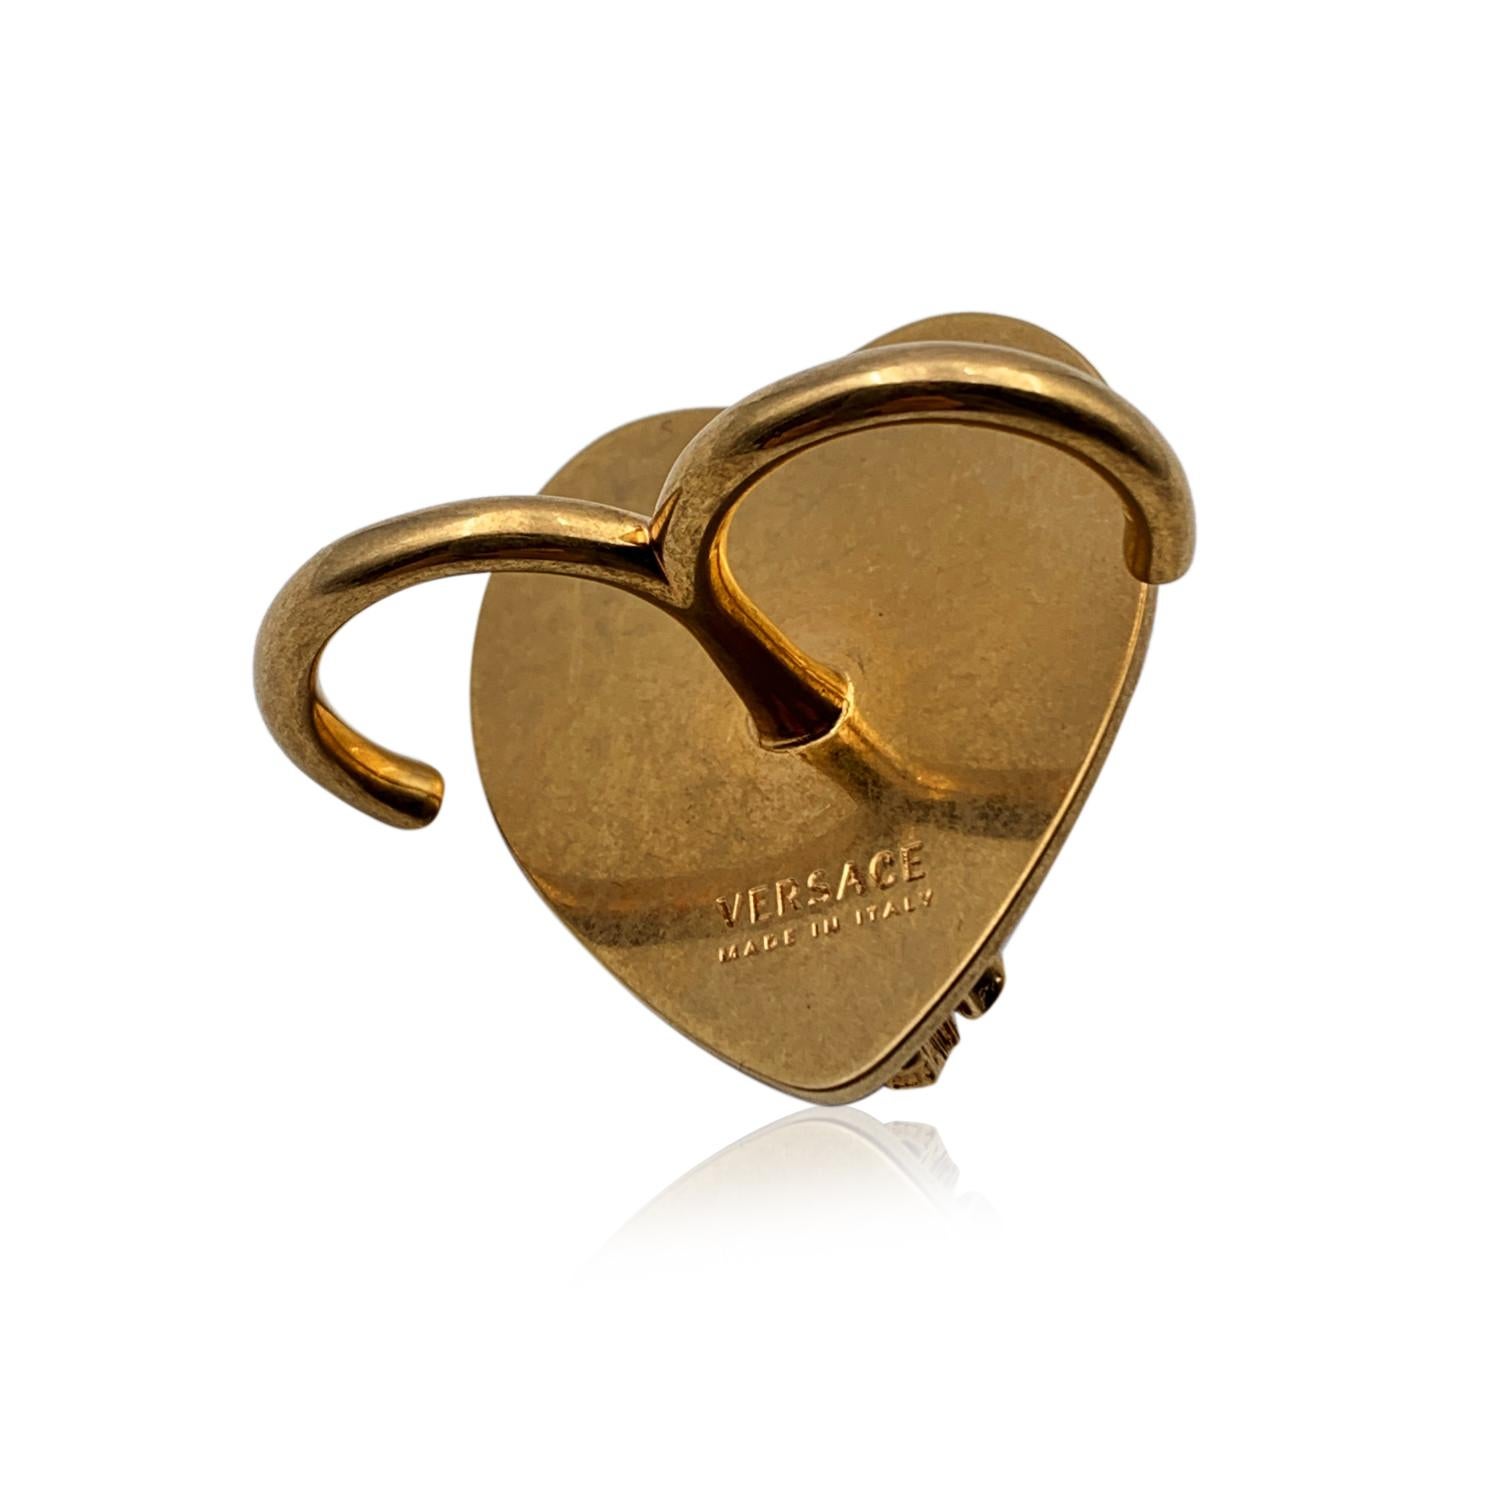 Beautiful Versace Virtus Heart Statement Double Ring. Crafted of red resin with red rhinestones embellishment and big gold metal V letter on top. Size: S. Max width on the top: 1.5 inches -3.5 cm. 'Versace - Made in Italy' engraved on the